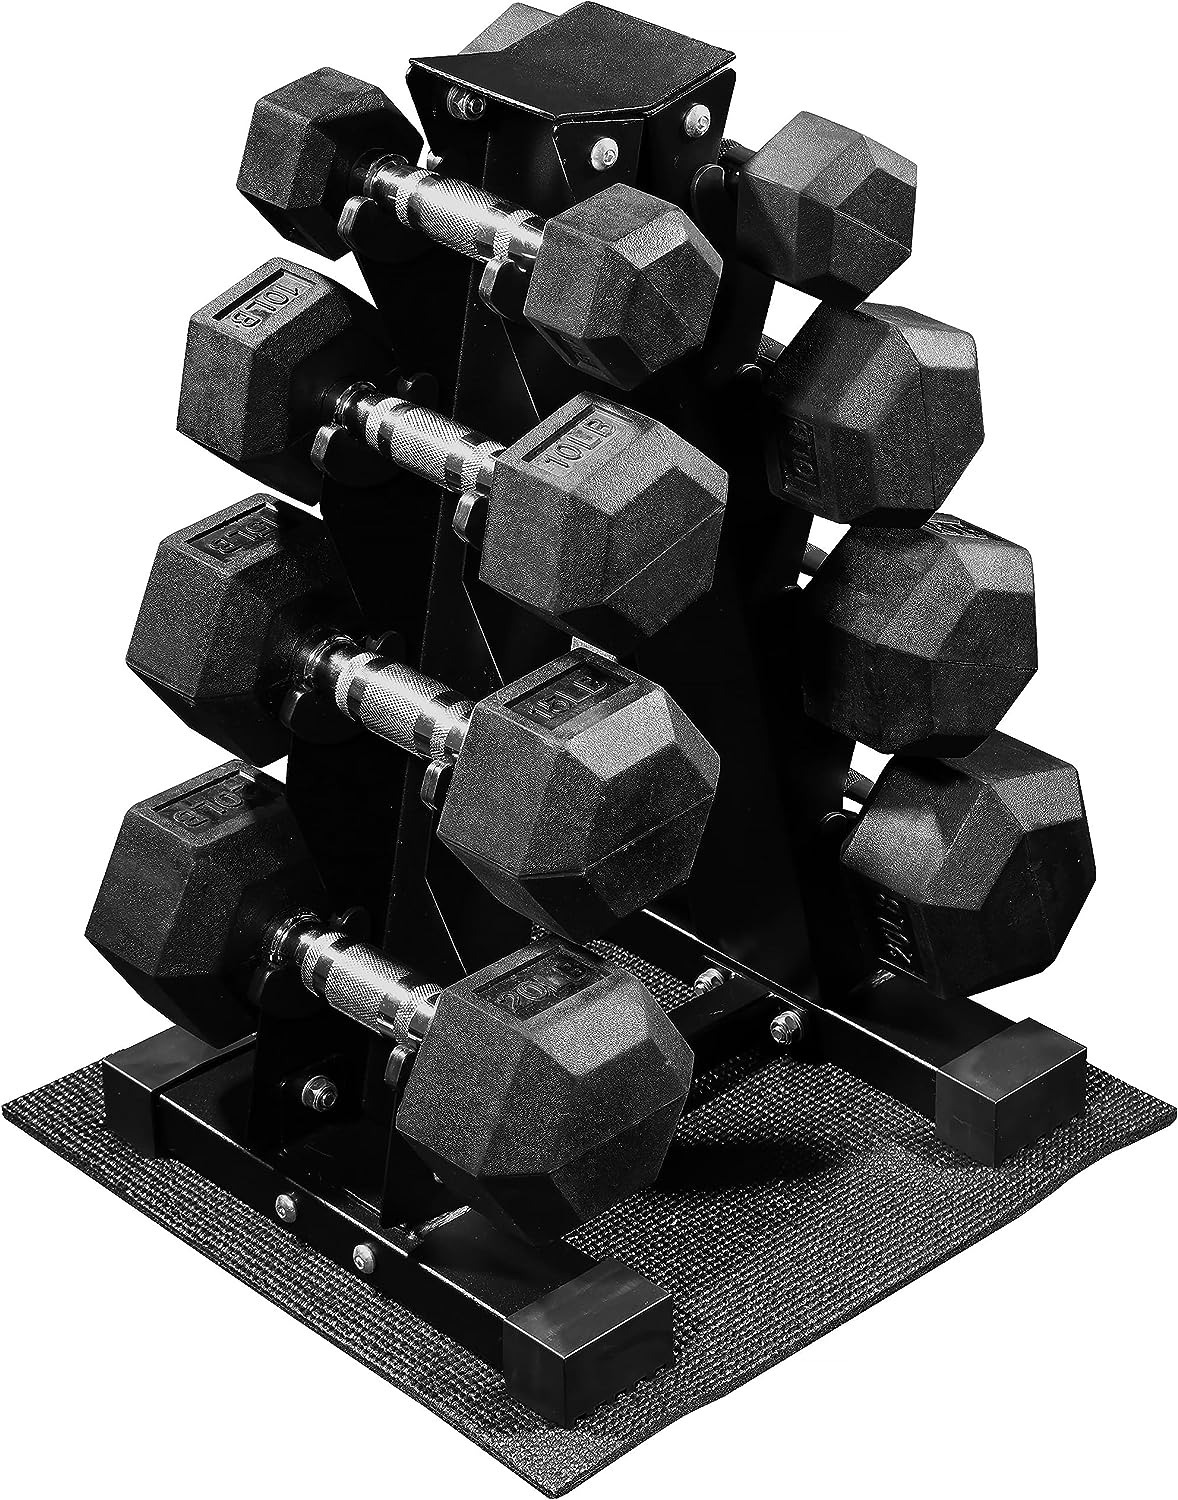 Signature Fitness 100-Lb Rubber Coated Hex Dumbbell Weight Set and Storage Rack $100 + Free Shipping